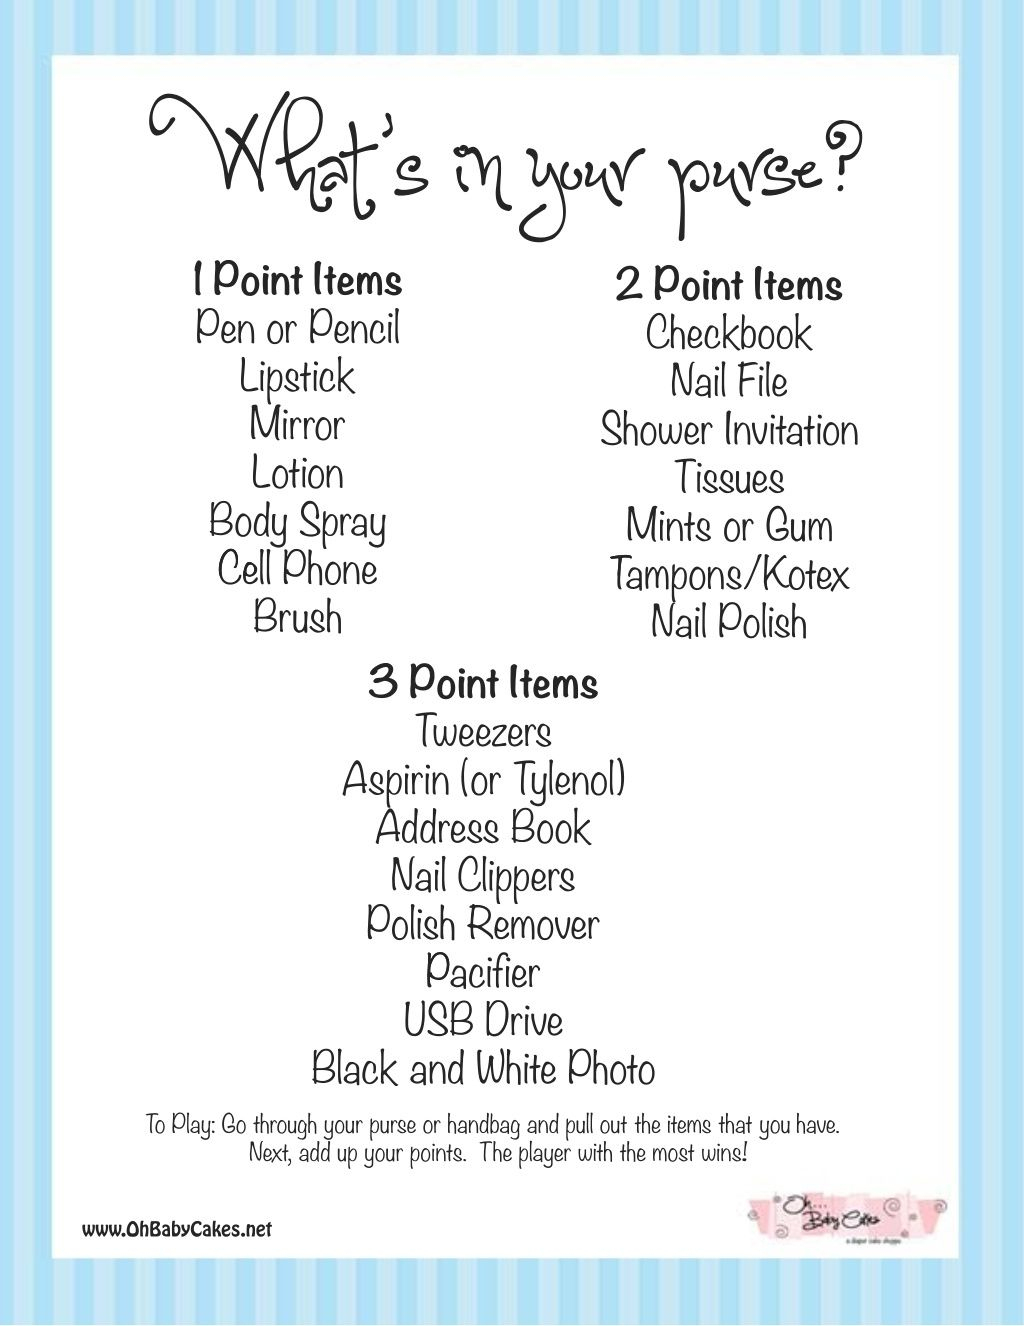 Whats-In-Your-Purse-Baby-Shower-Game-Blueww.ohbabycakes Via - Free Printable Baby Shower Game What&amp;#039;s In Your Purse